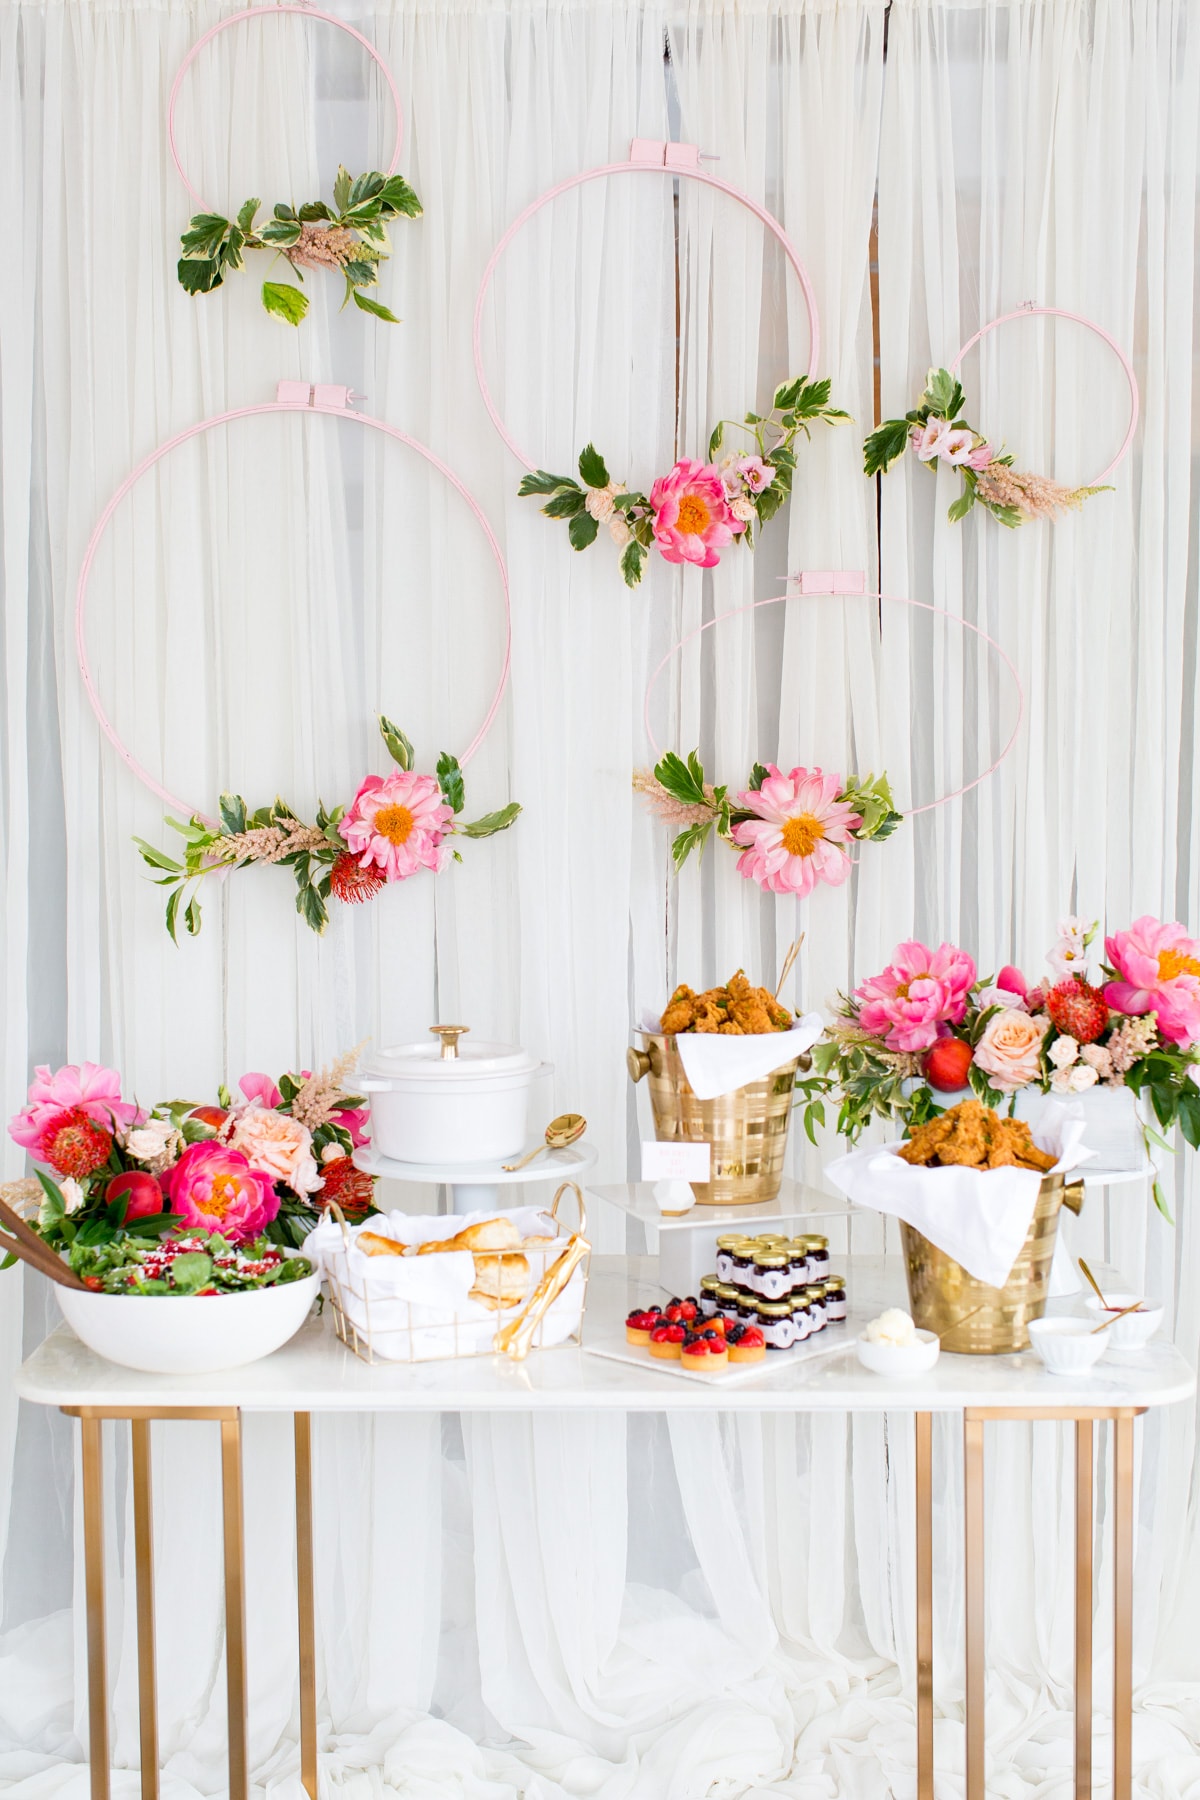 DIY Floral Embroidery Ring Backdrop by Ashley Rose of Sugar & Cloth, a lifestyle blog in Houston, TX